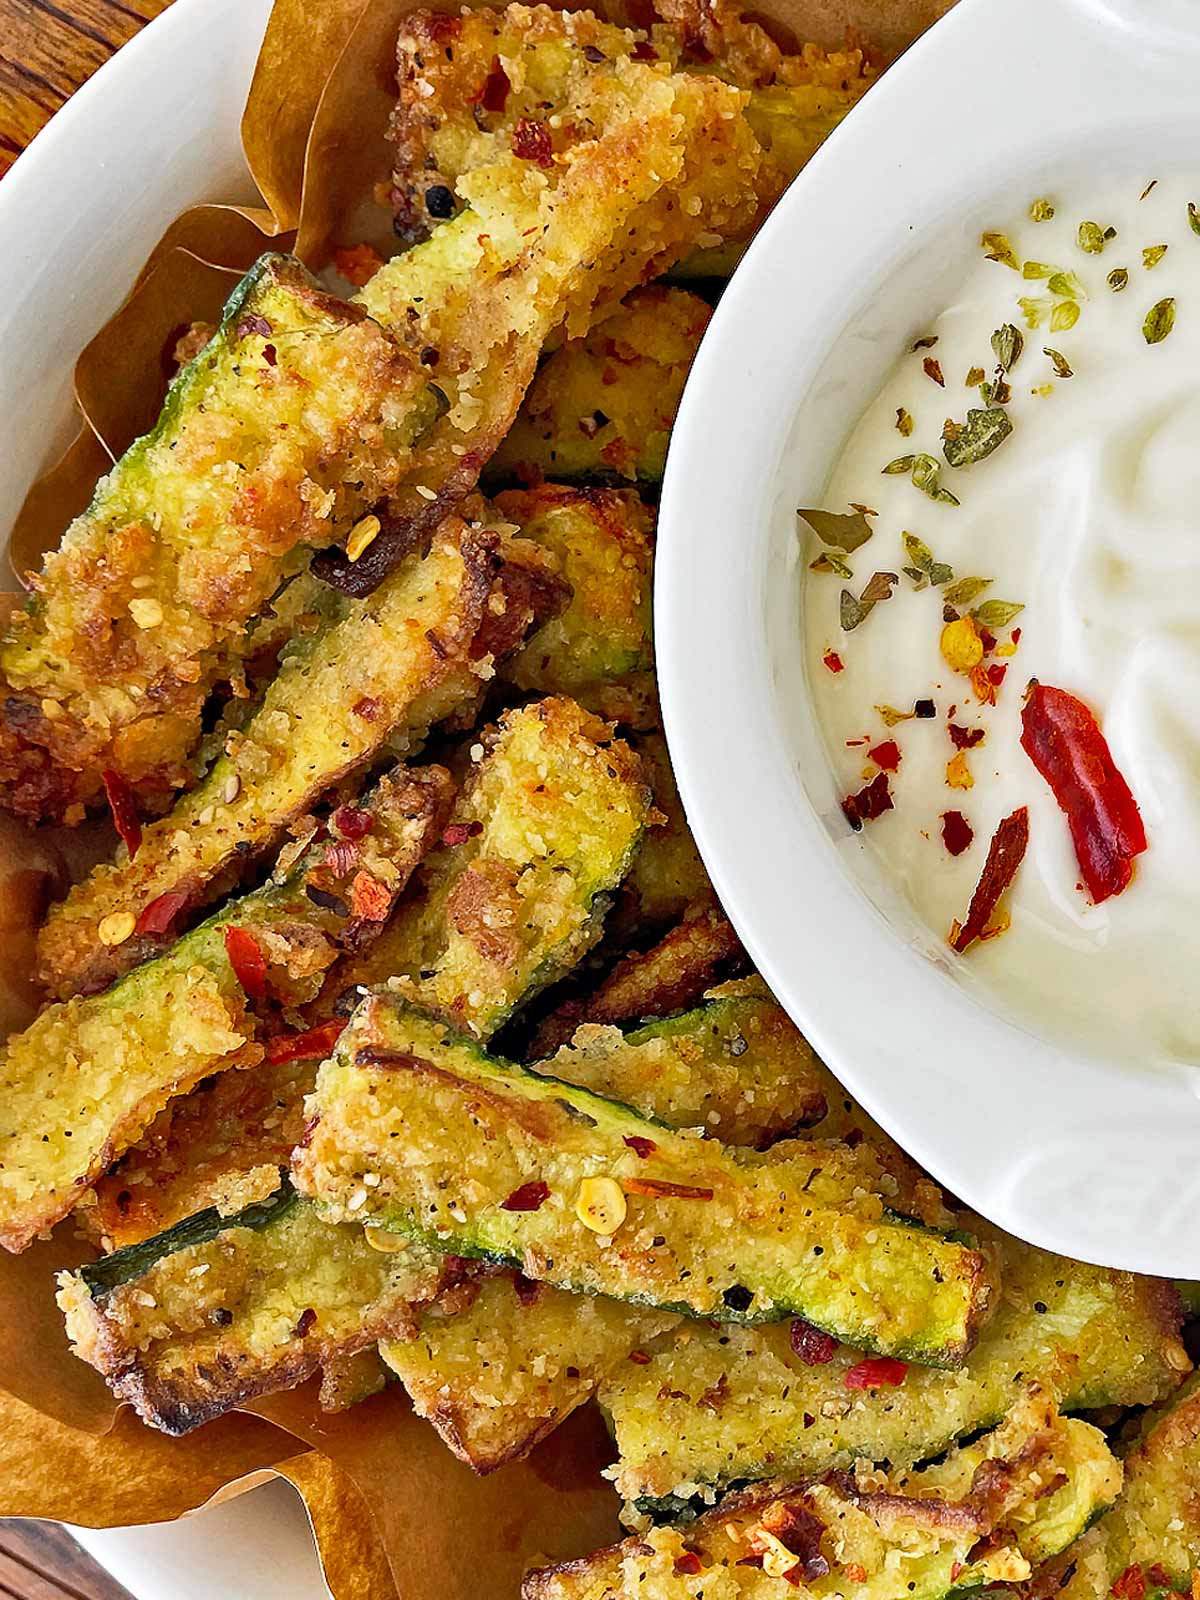 Plate of golden brown zucchini fries with a garlic aioli dipping sauce.